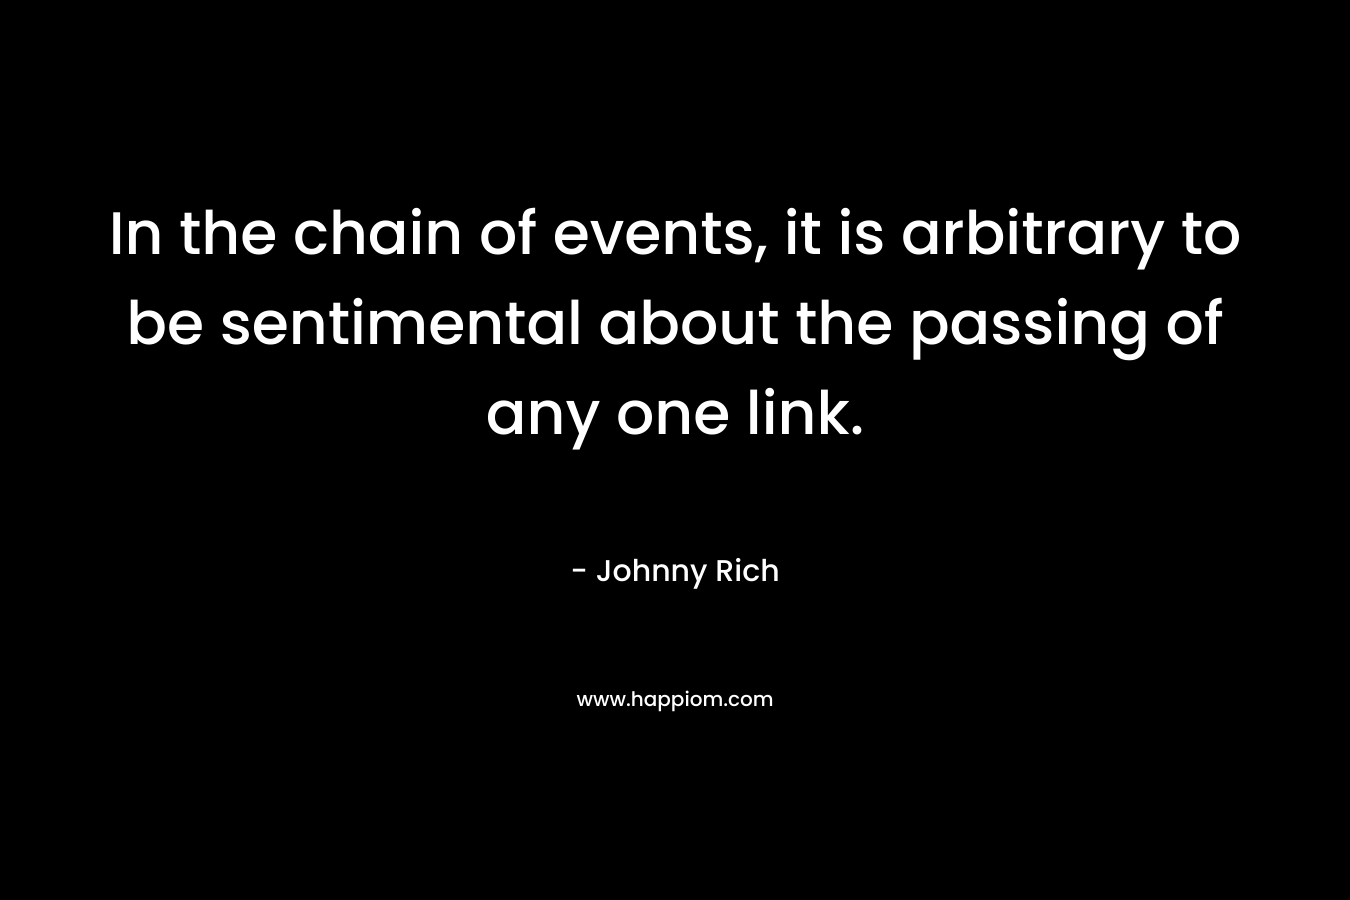 In the chain of events, it is arbitrary to be sentimental about the passing of any one link. – Johnny Rich